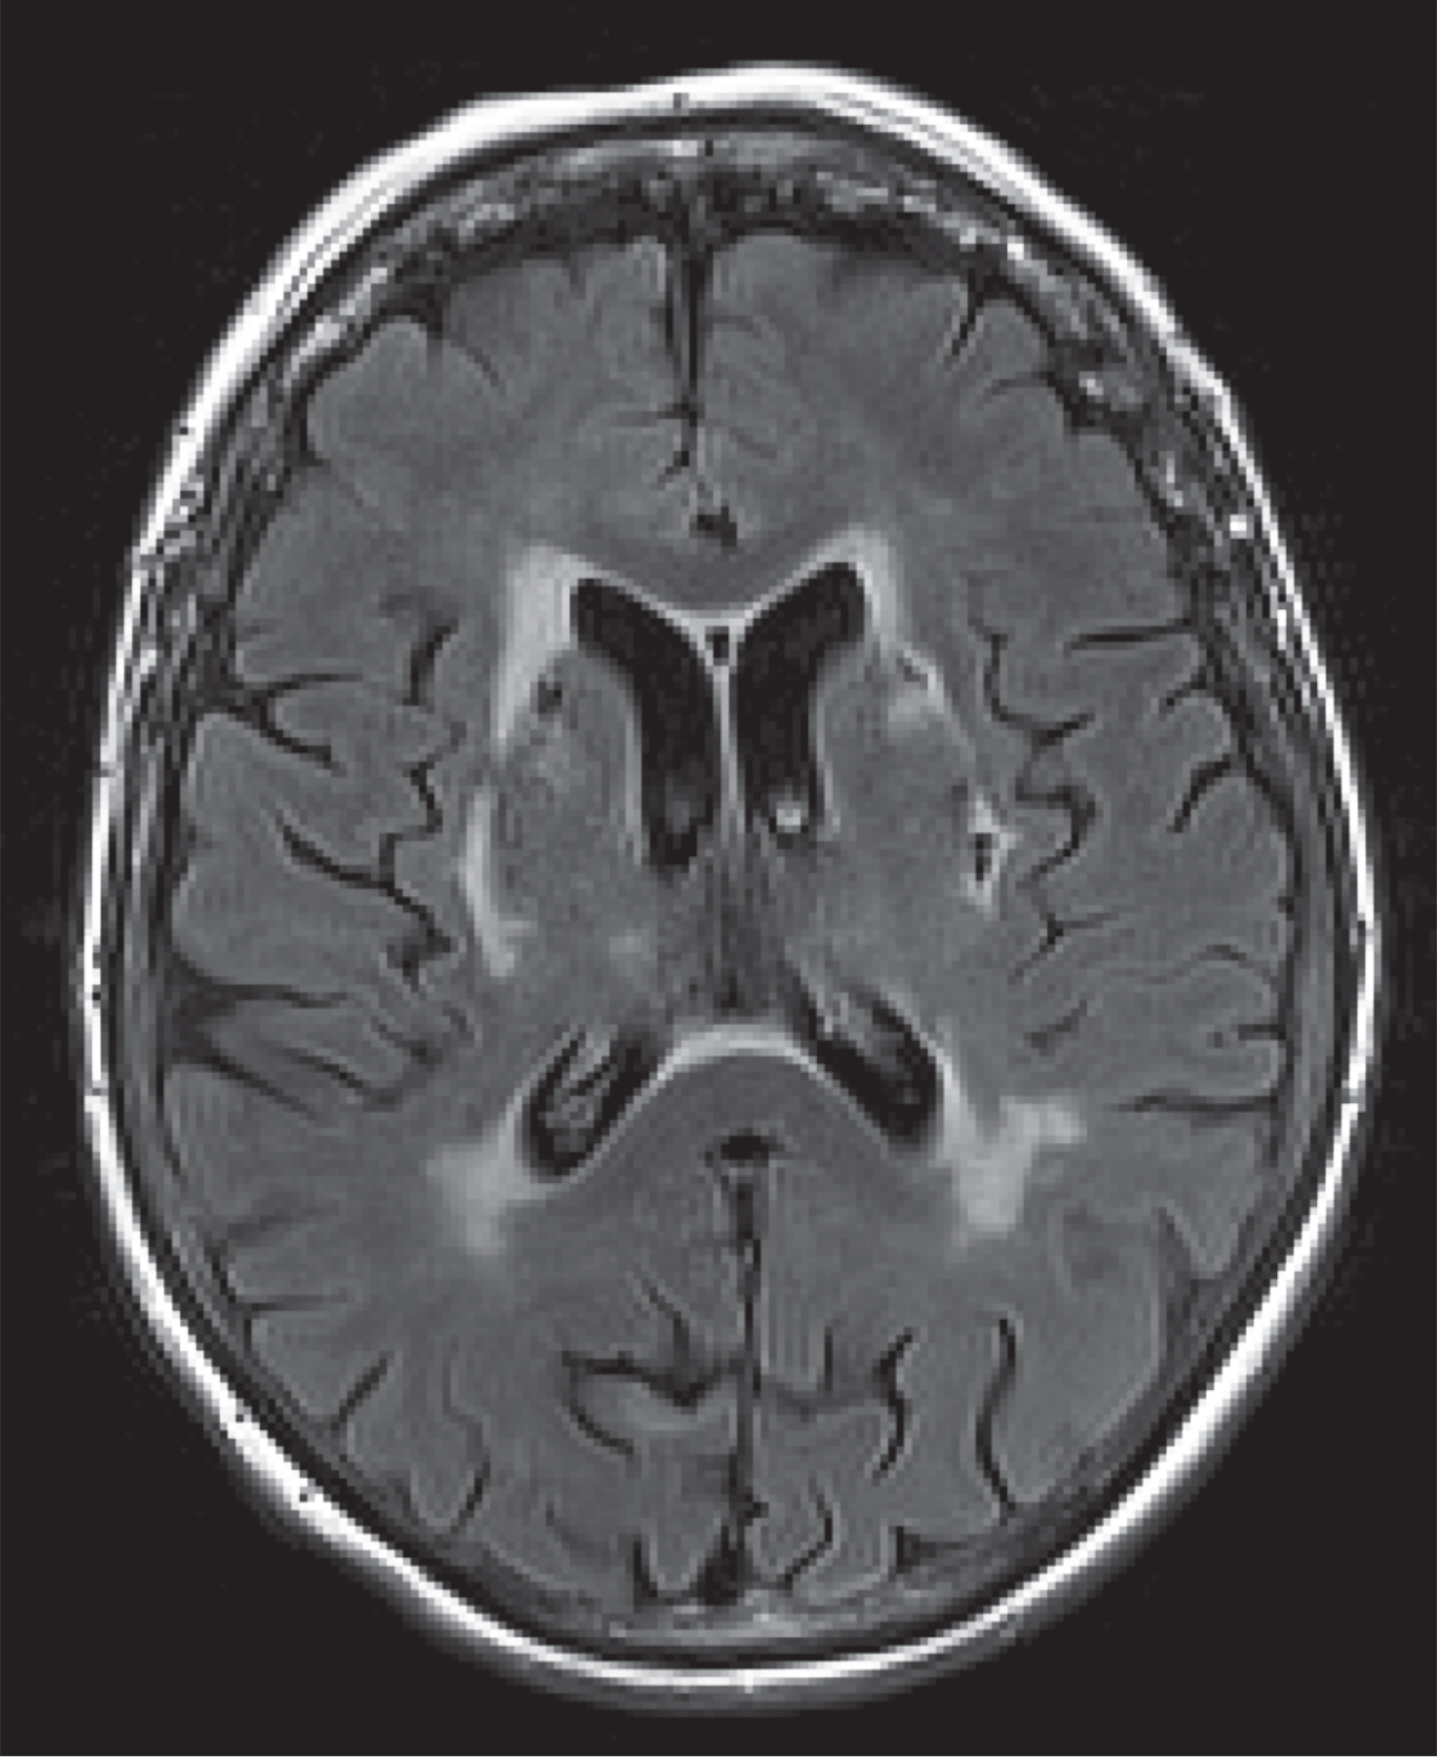 MR FLAIR image of patient with basal ganglia infarcts.